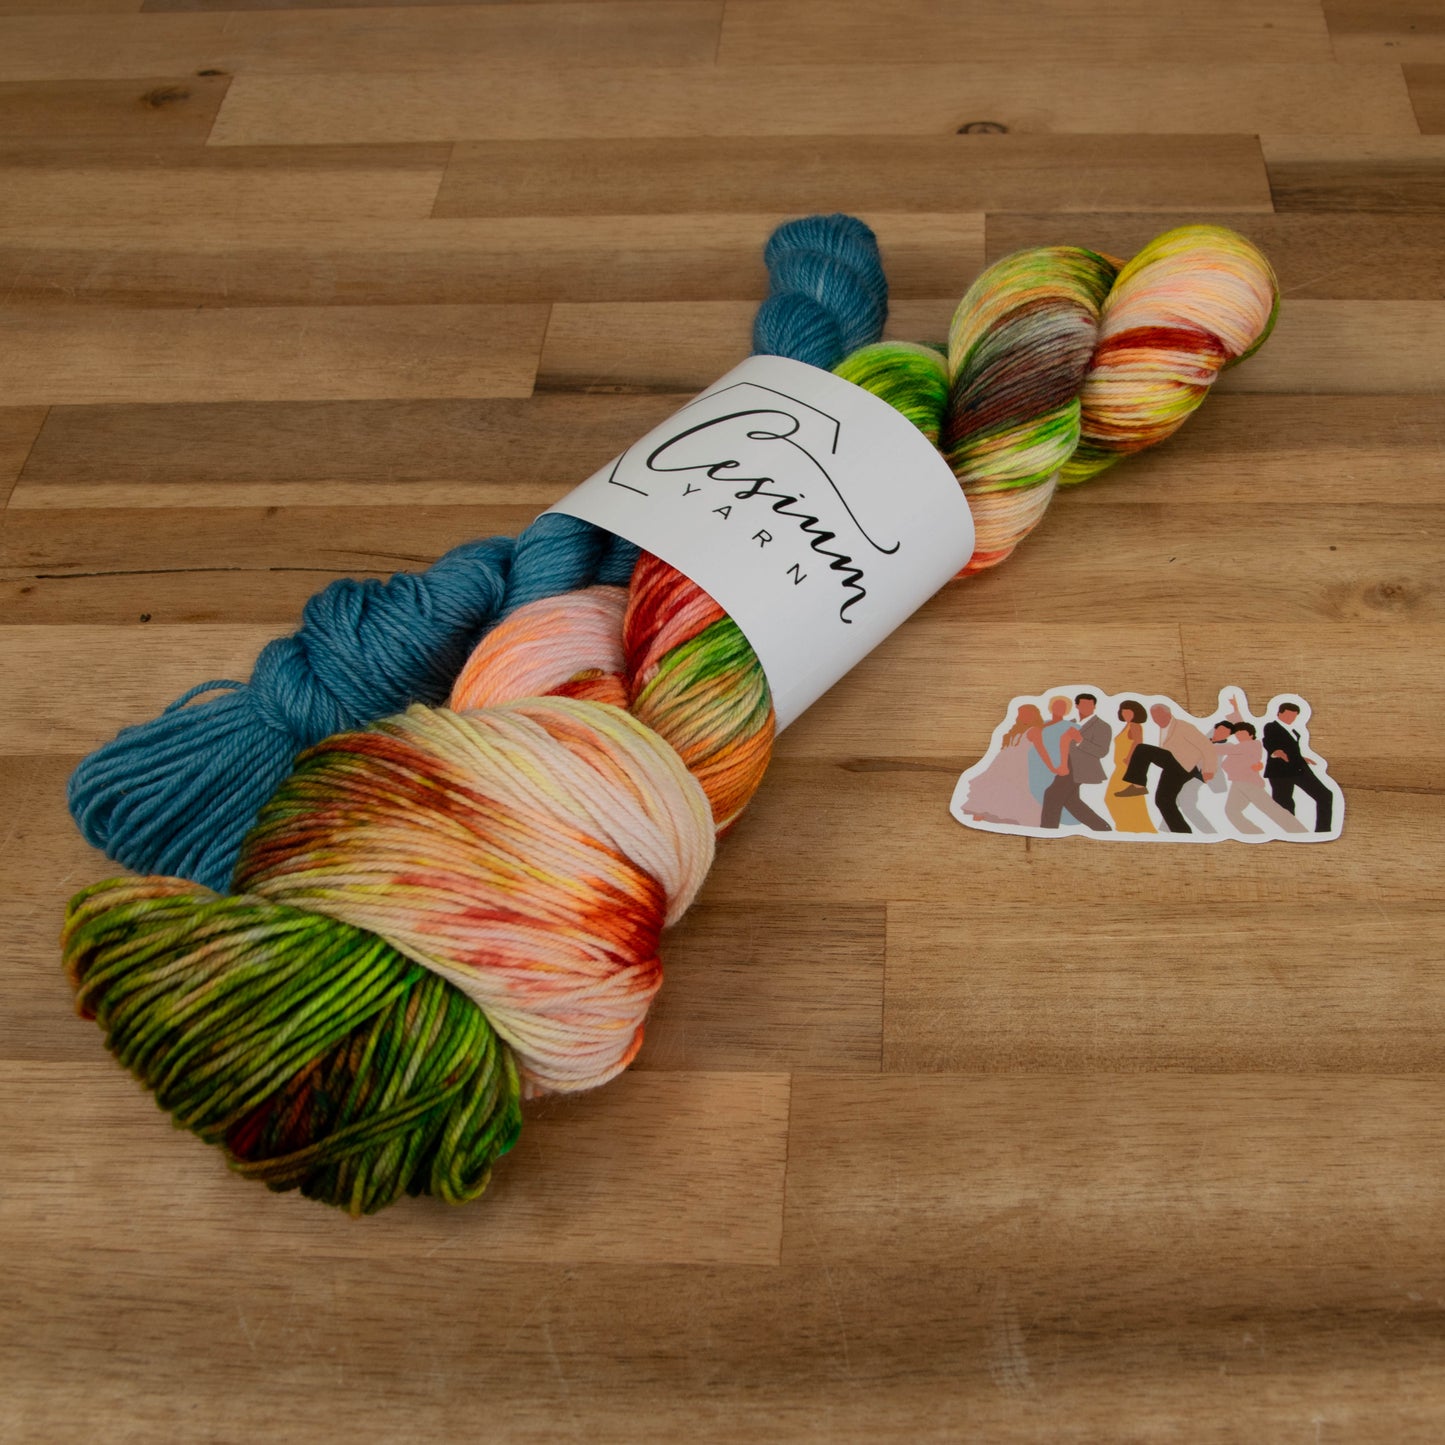 A neon skein of yellow, orange, and green yarn with dark green and red next to an aqua mini skein and a sticker with an illustration of the cast from Mamma Mia.